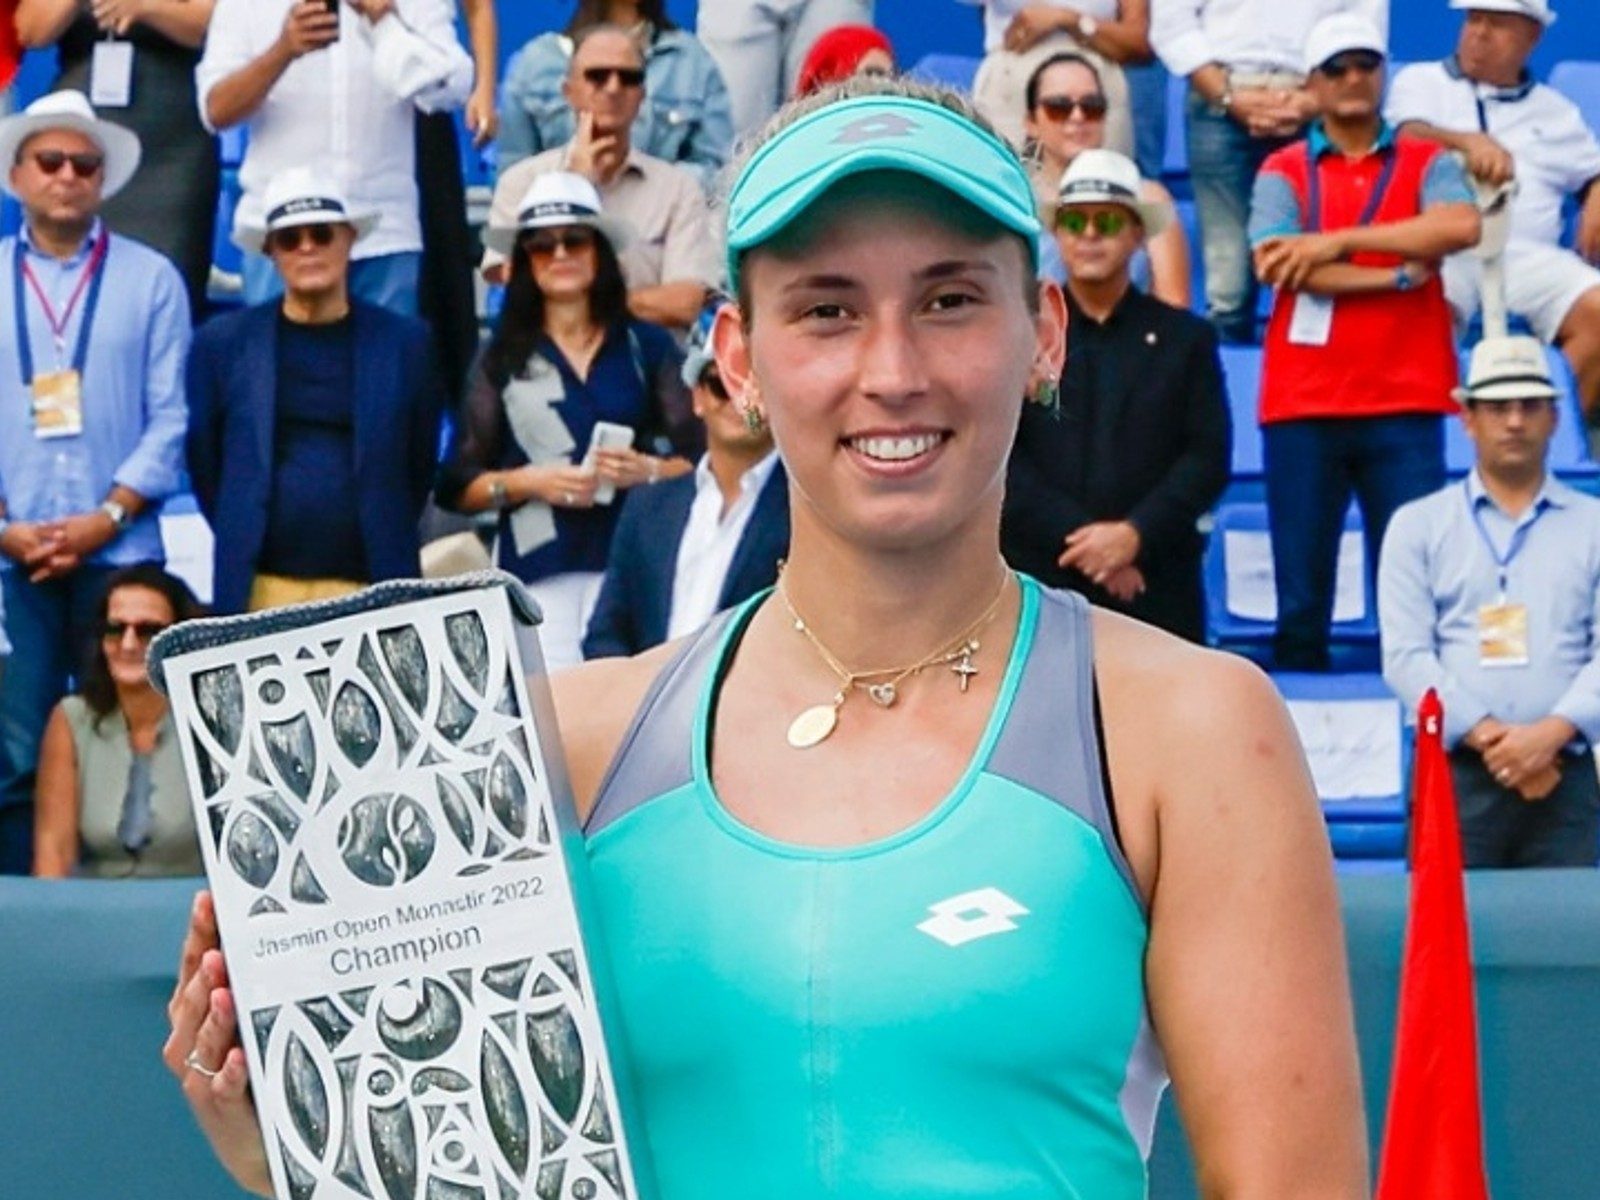 Jasmin Open Elise Mertens Clinches Title With Win Over Alize Cornet